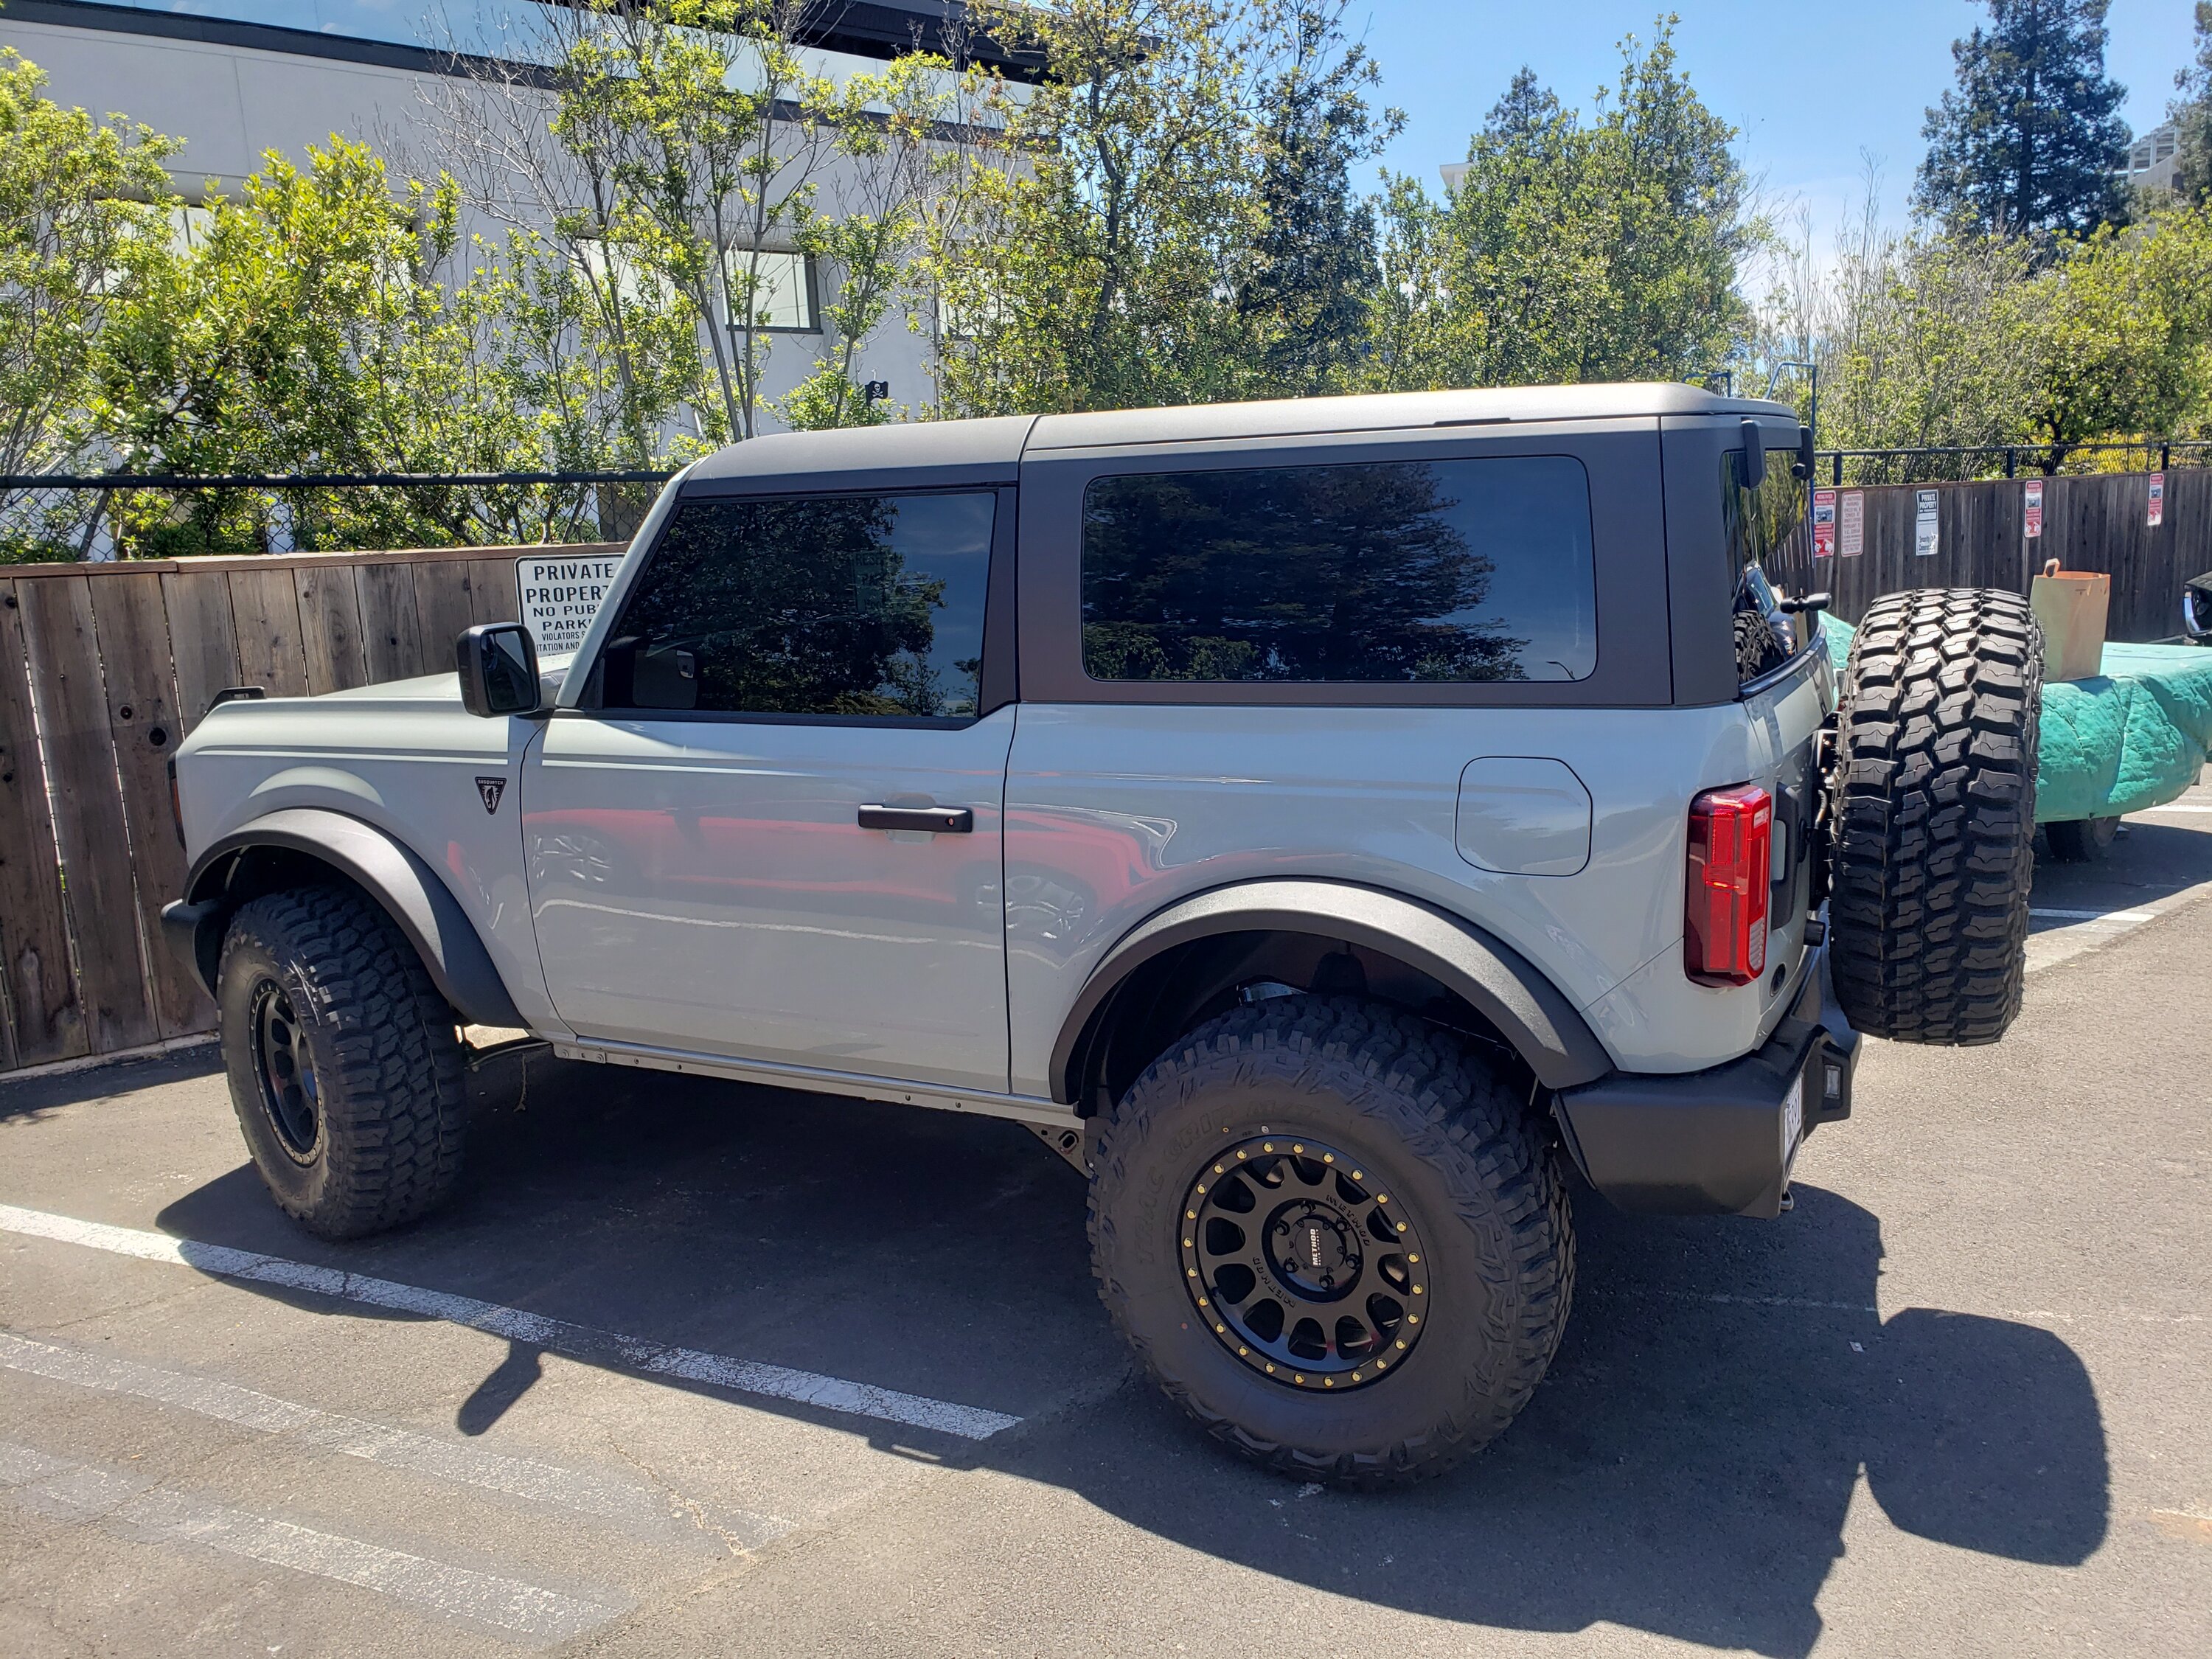 Ford Bronco Tint reference gallery -- post your Bronco pics & specs 📸 😎 20220608_125048